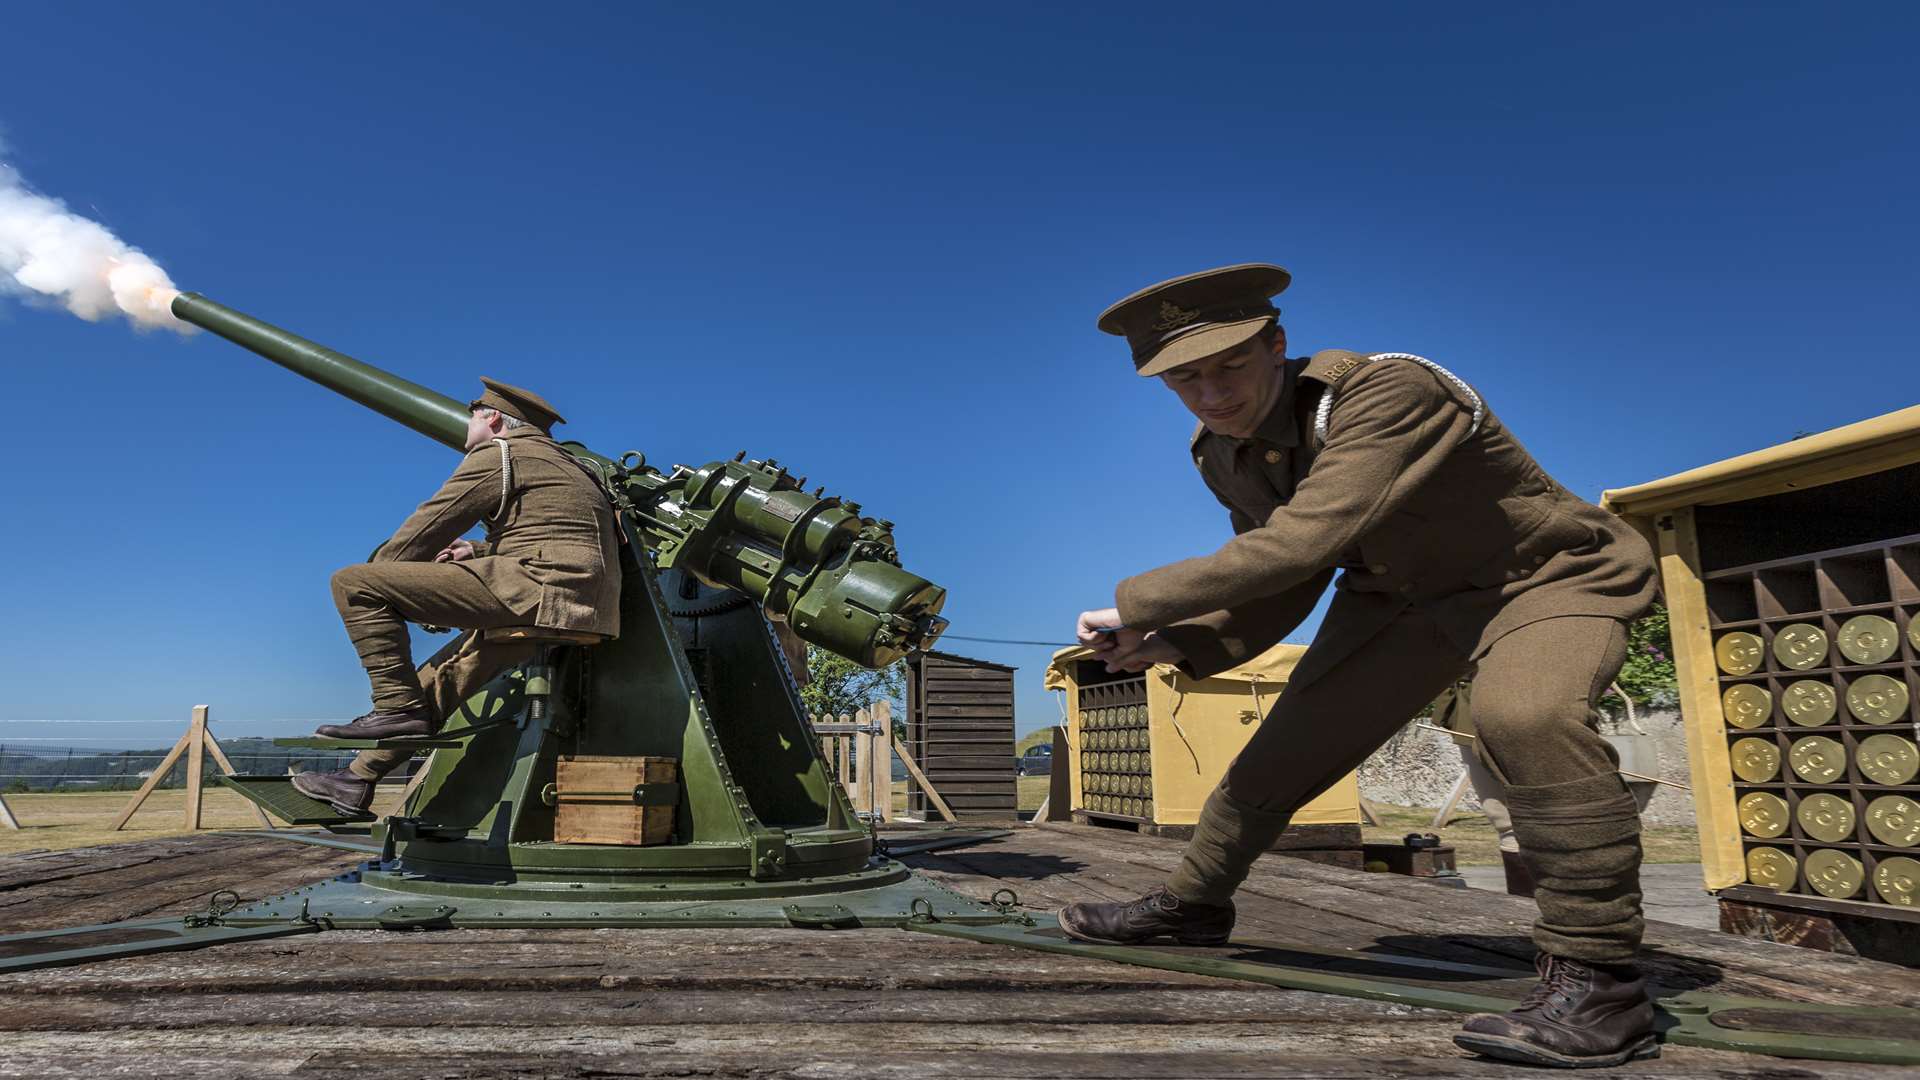 Fortress event at Dover Castle sees restored anti-aircraft gun.